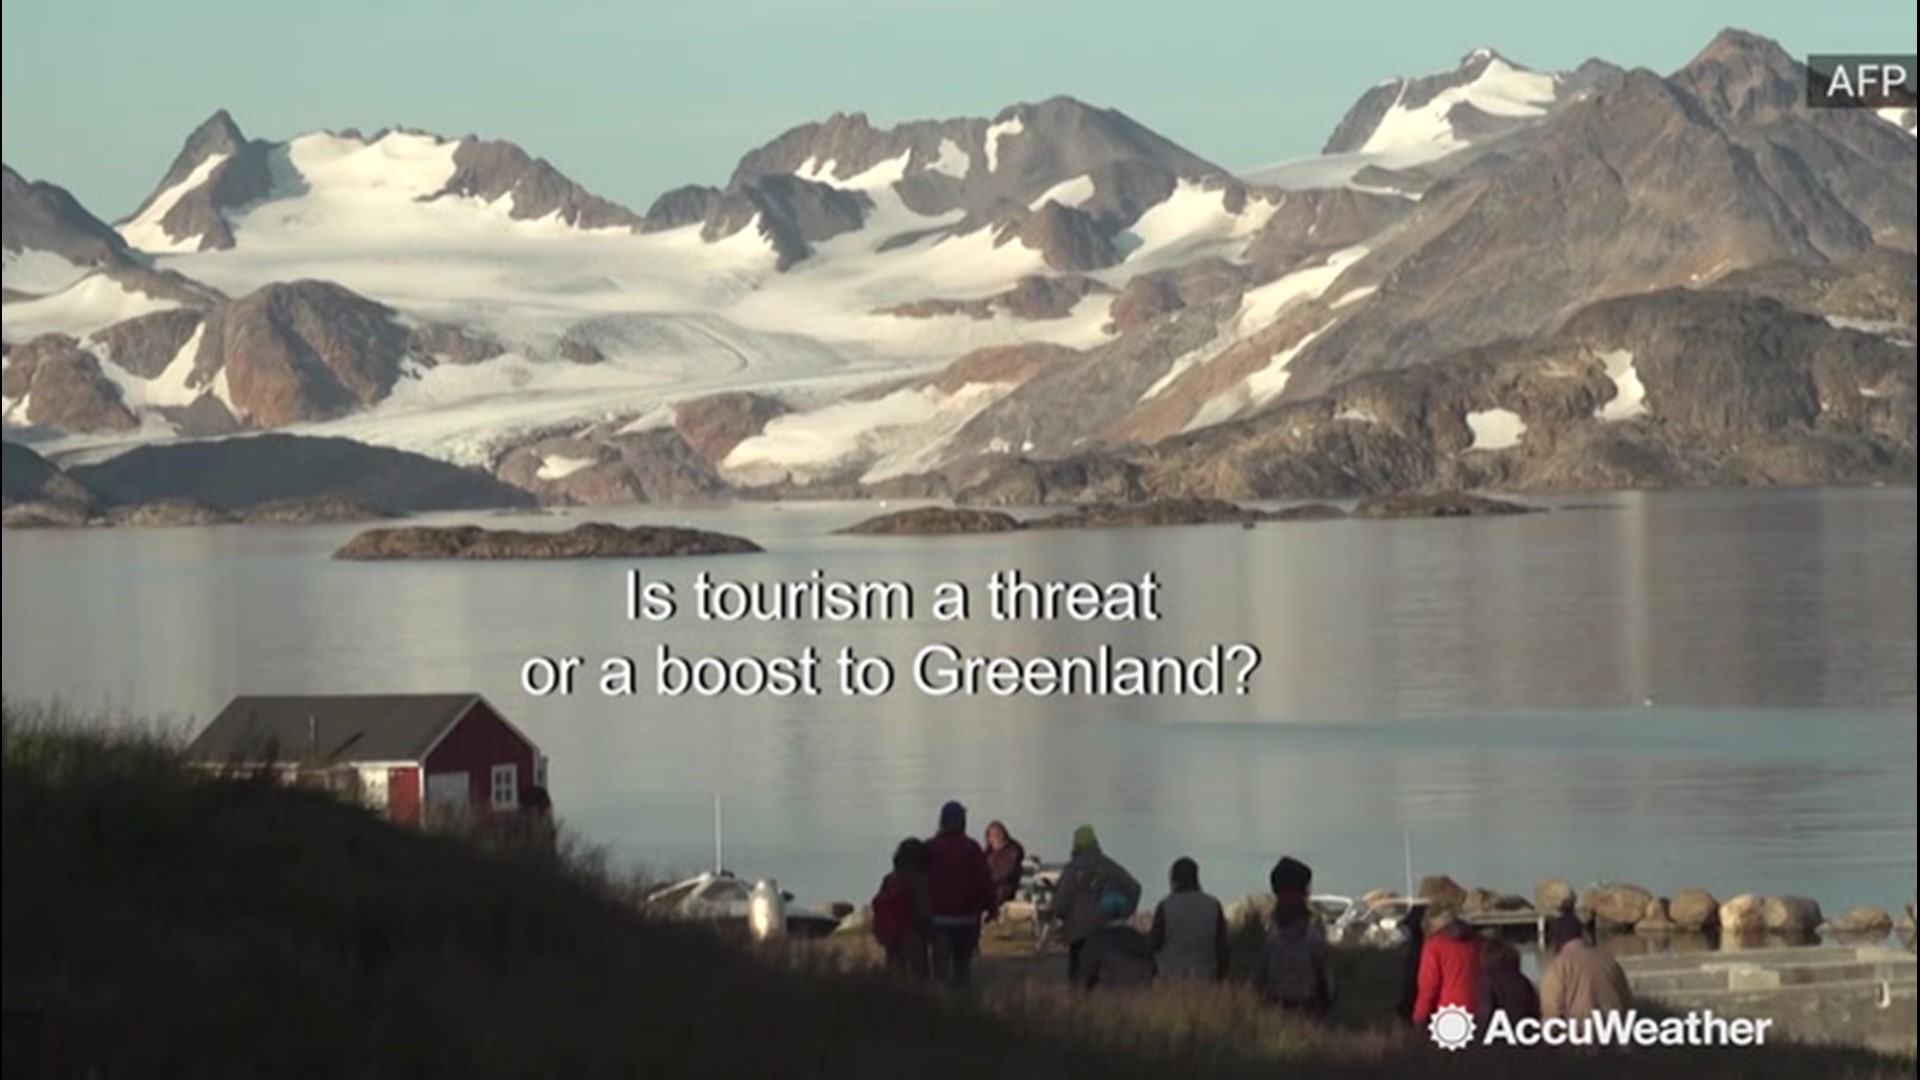 Each year, more and more people are visiting the world's largest island: Greenland. While increased tourism is generally a welcome sight, it may pose a threat to the environment.